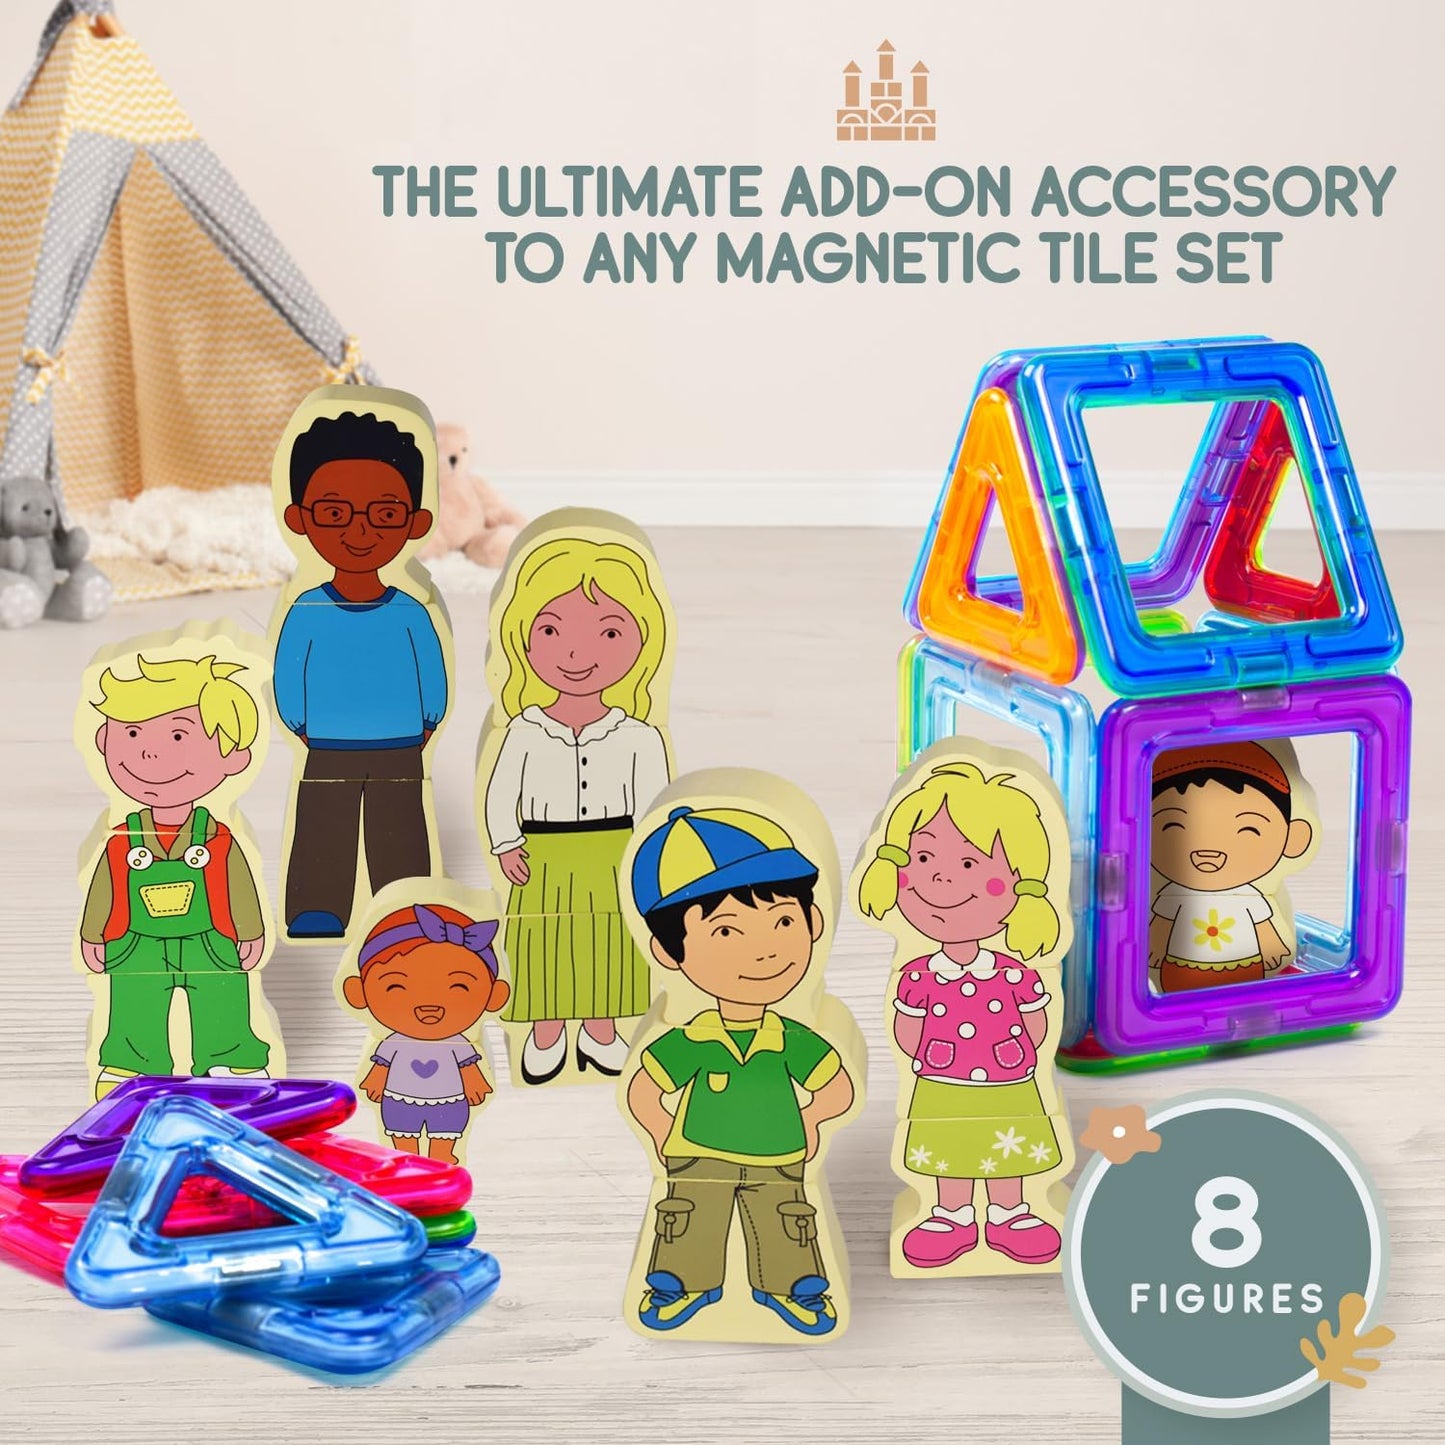 NEW 22pc Wooden Magnetic Figures Set of 8 (16 Double Sided Characters) Mix & Match Family Set - Compatible with All Magnetic Tiles Sets - Educational STEM Building Toy Pretend Playset for Ages 3+